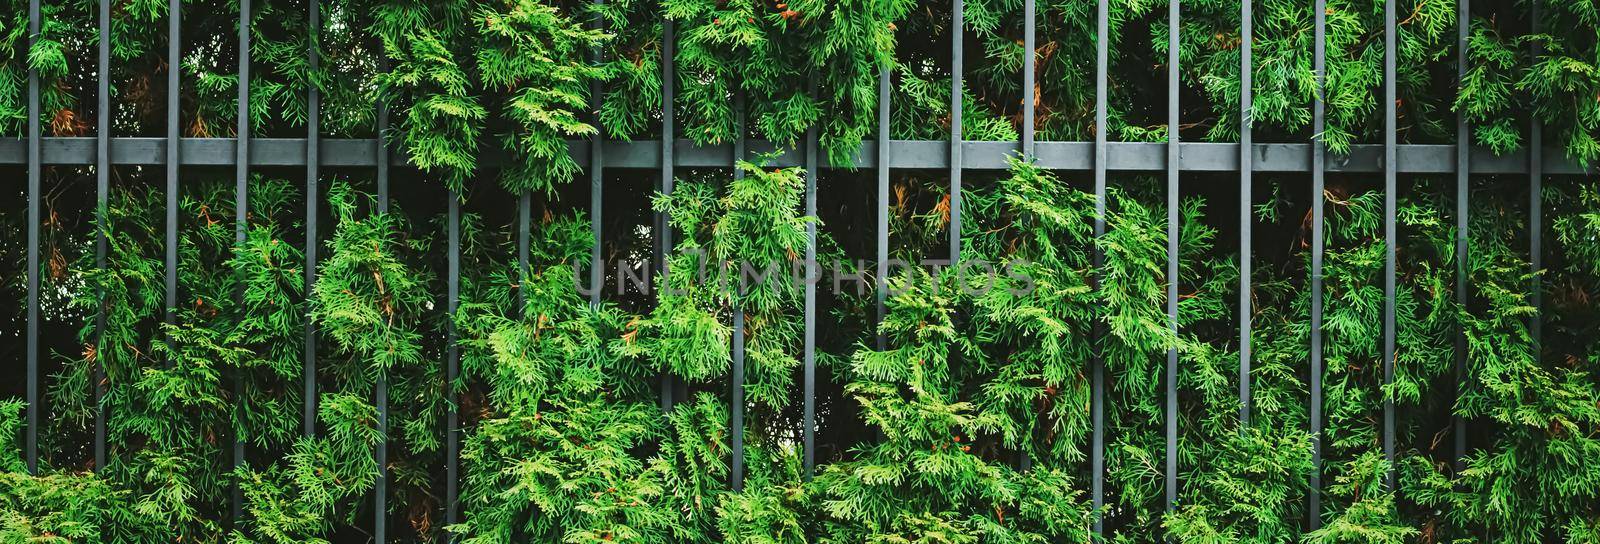 Green plant wall and fence as plant texture, nature background and botanical design by Anneleven